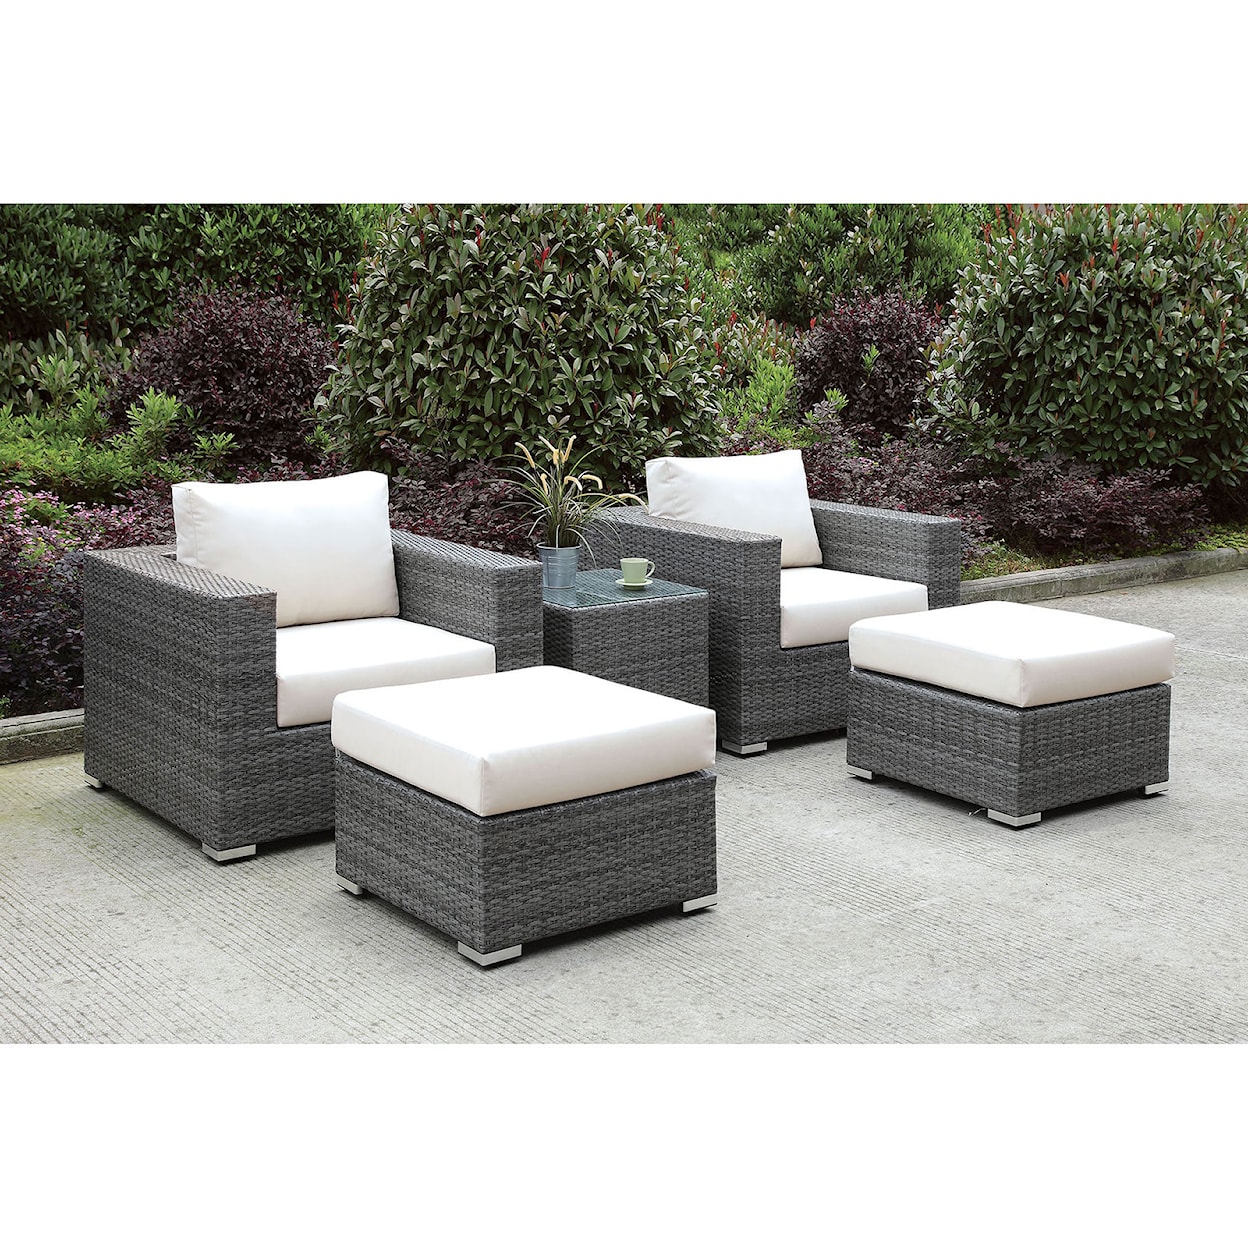 Furniture of America Somani 2 Chairs + 2 Ottomans + End Table